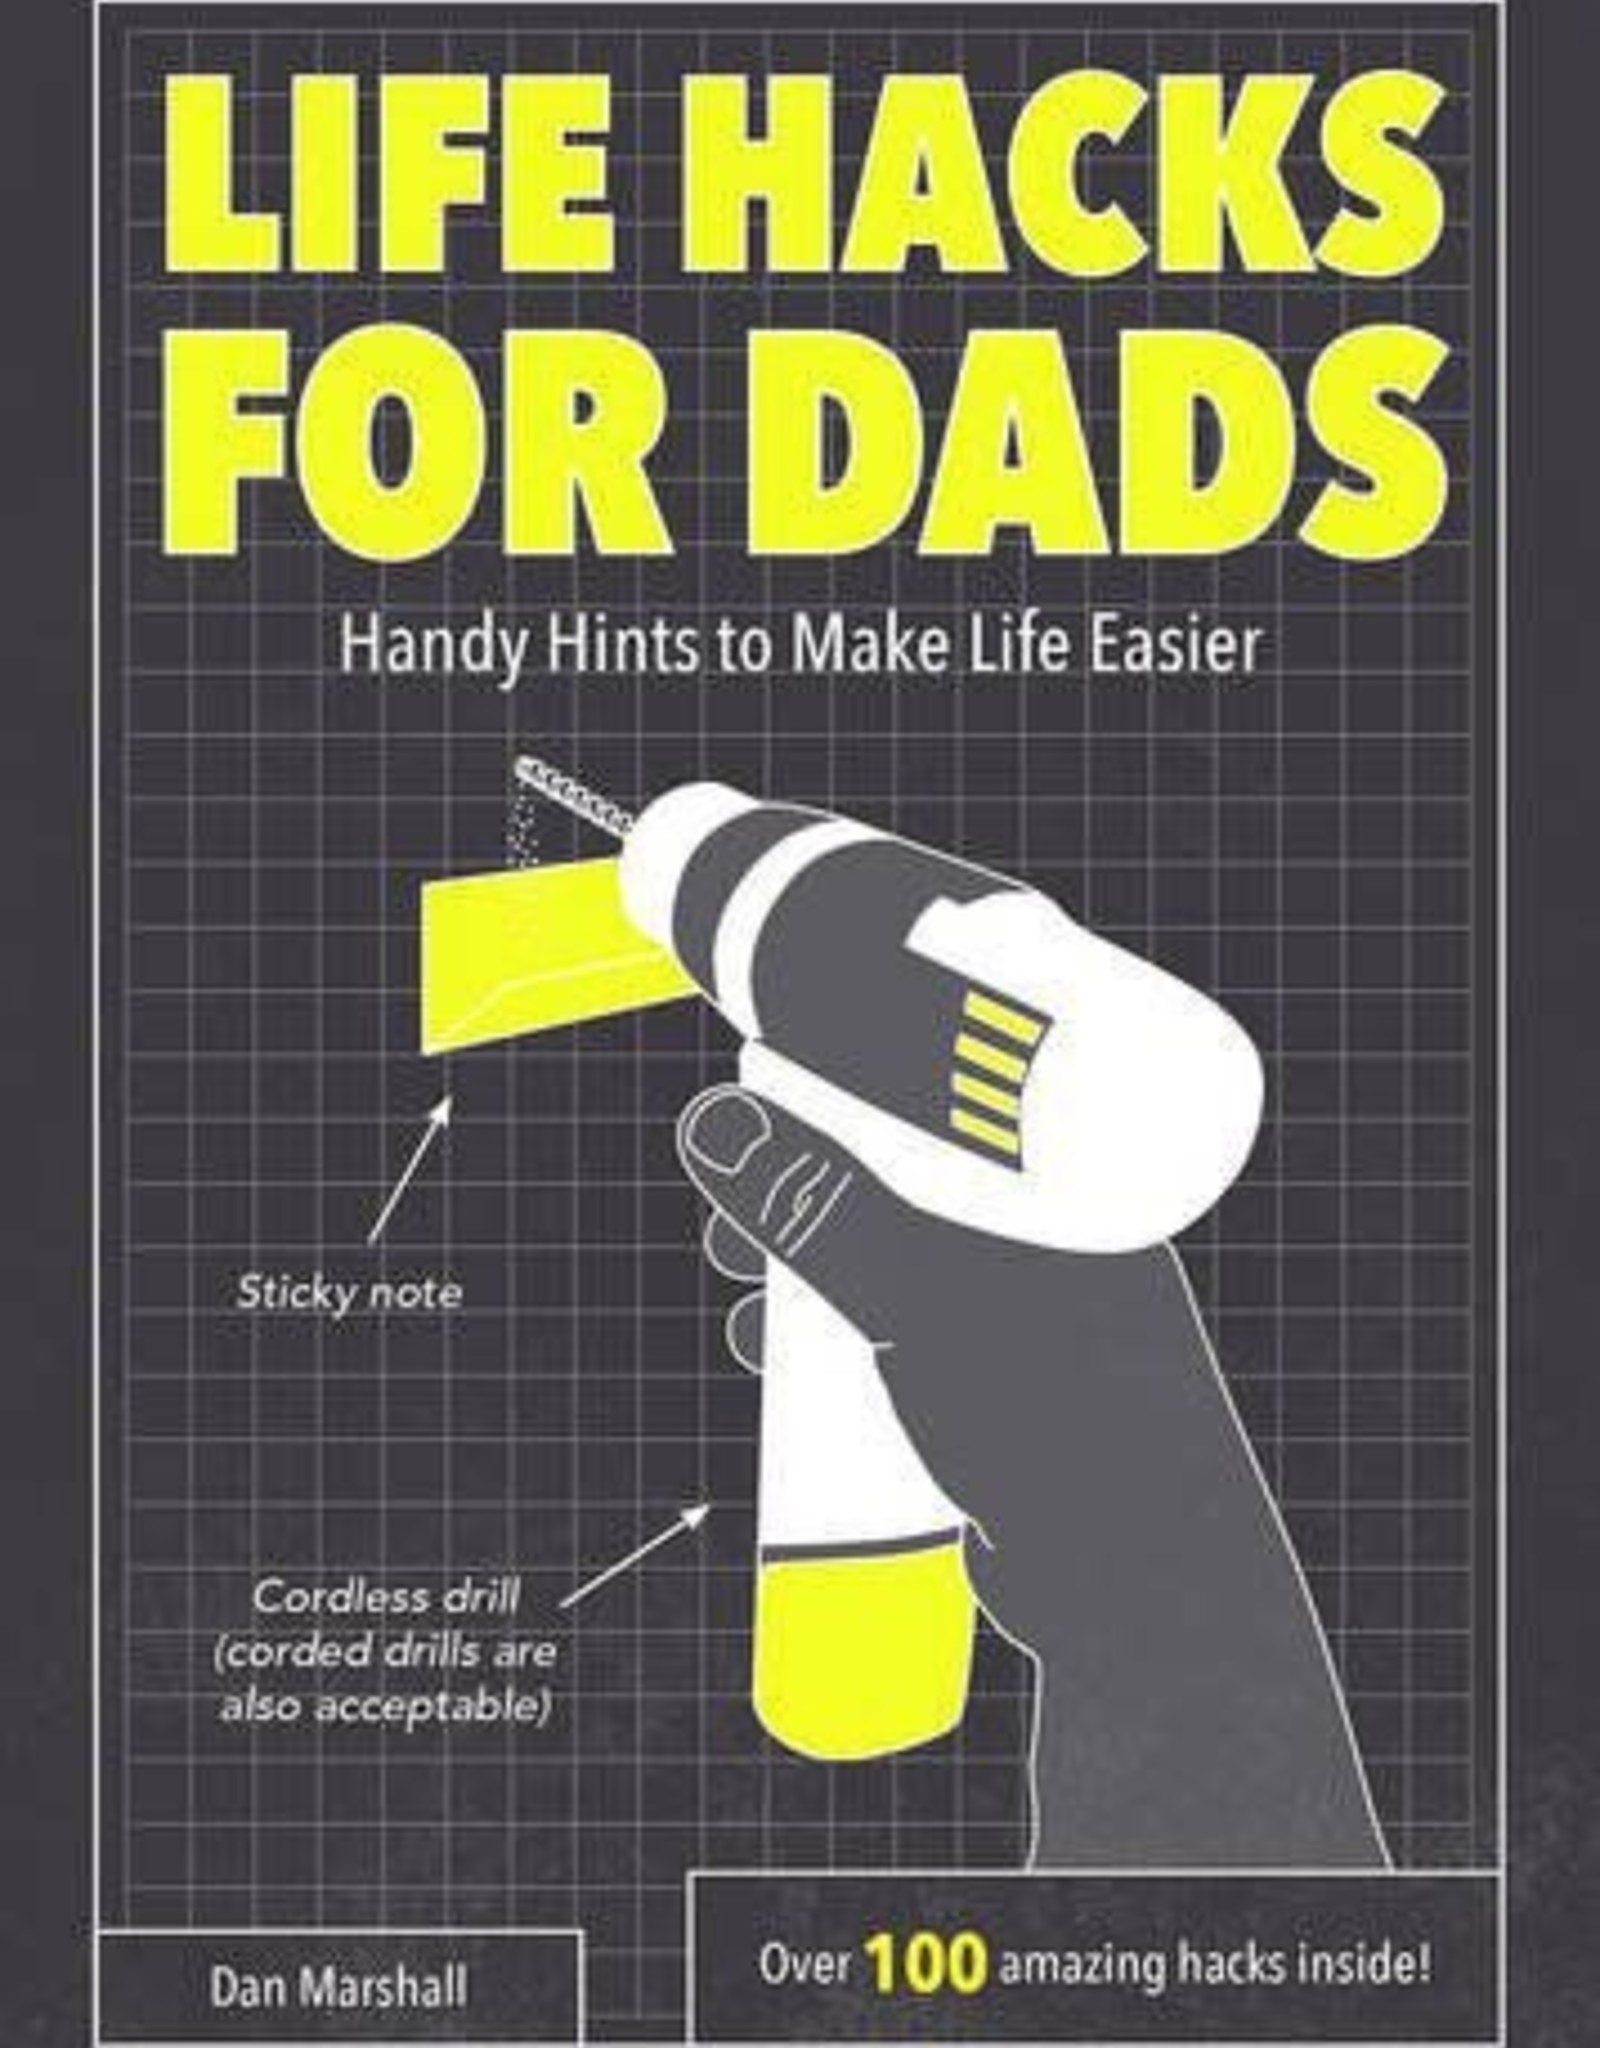 LIFE HACKS FOR DADS